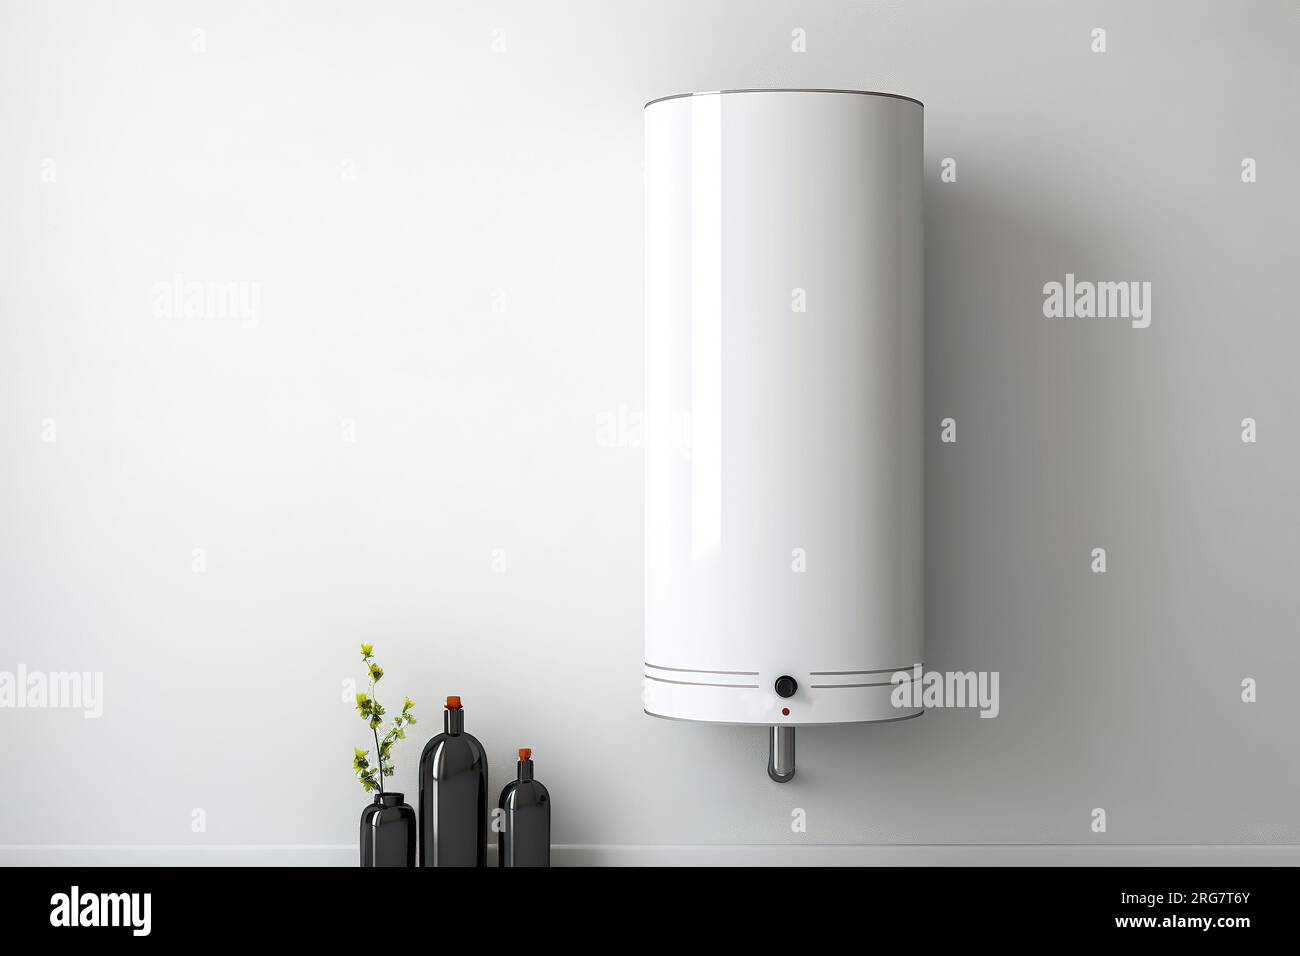 https://c8.alamy.com/comp/2RG7T6Y/wall-in-the-bathroom-with-a-mounted-electric-water-heater-2RG7T6Y.jpg